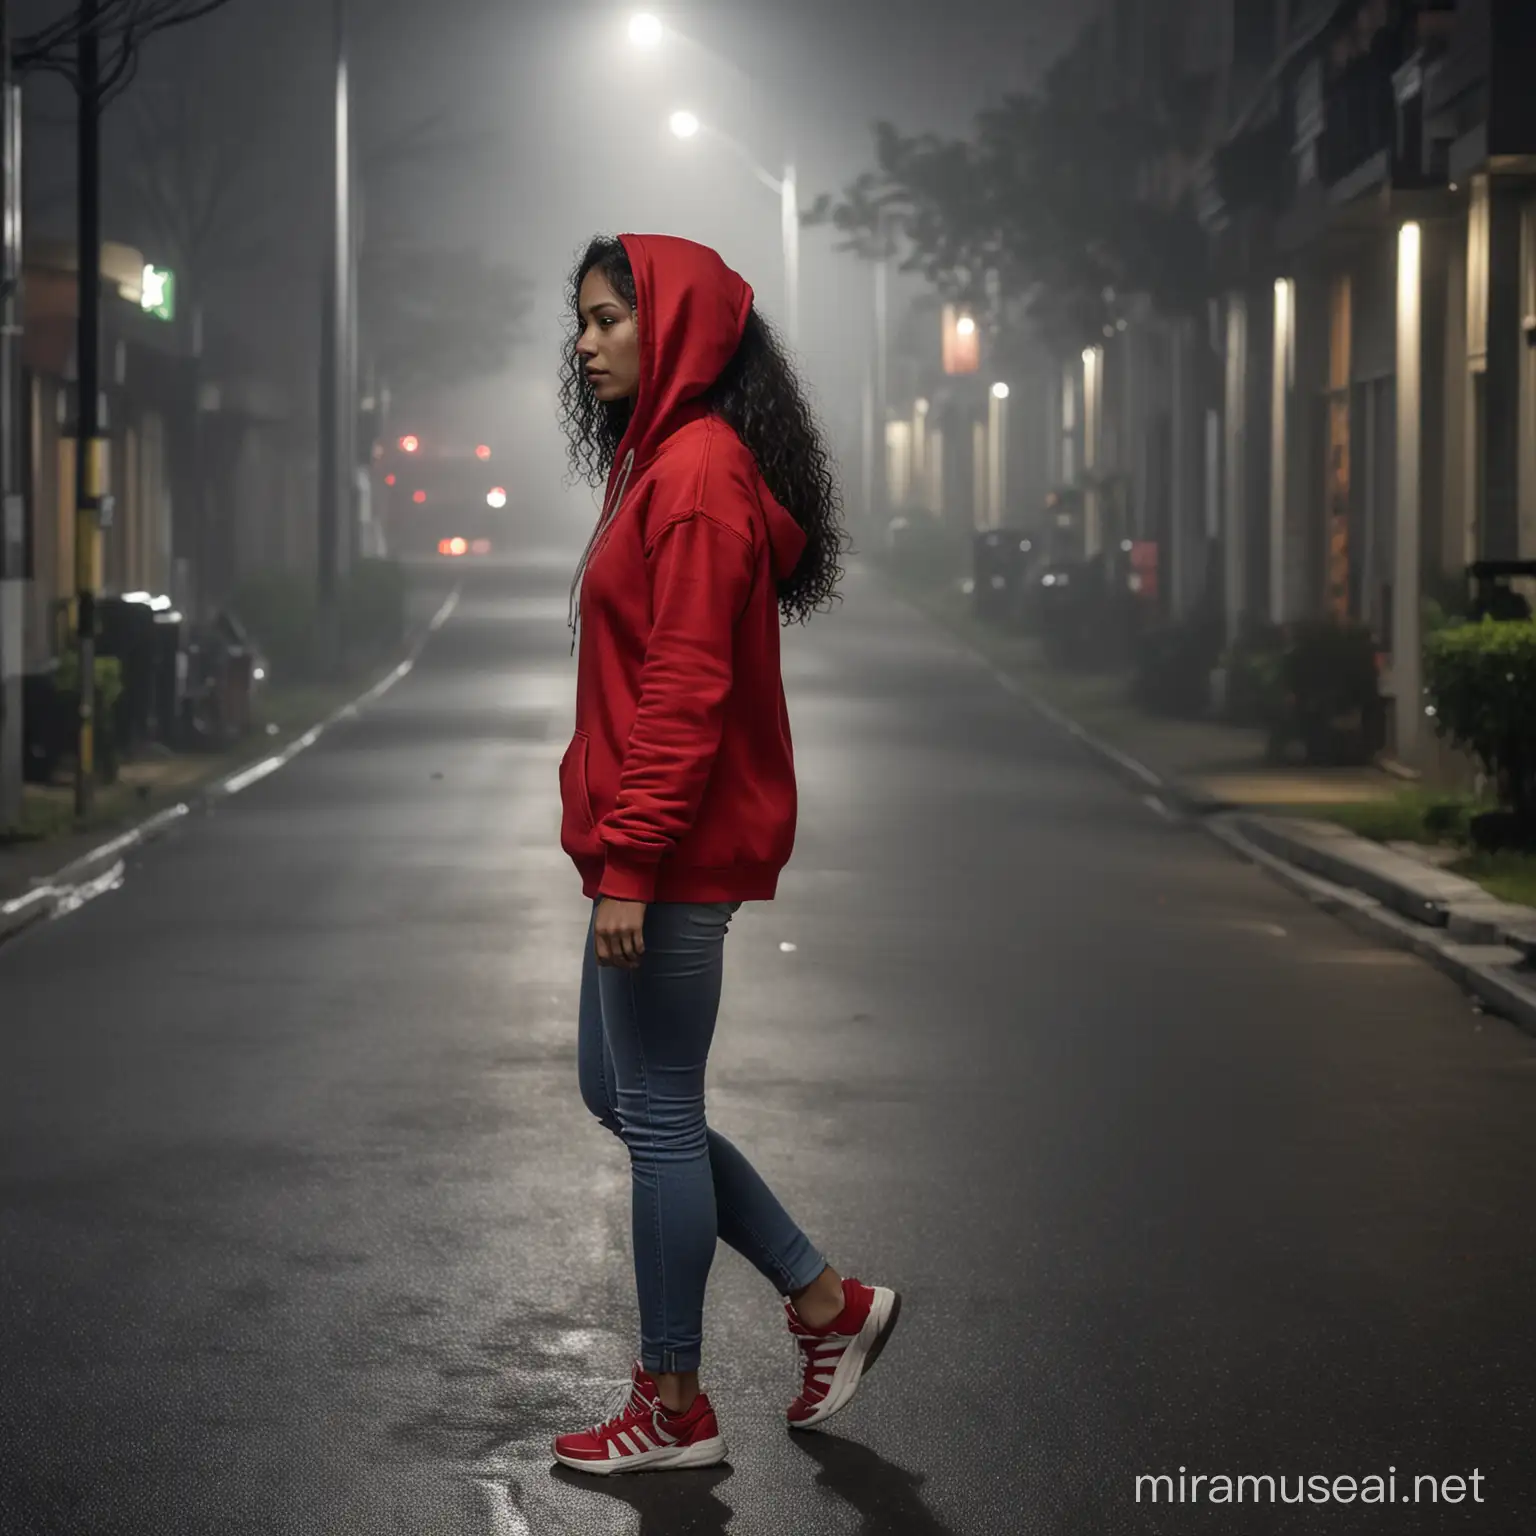 Indonesian Woman in Red Hoodie Walking Alone on Foggy Night